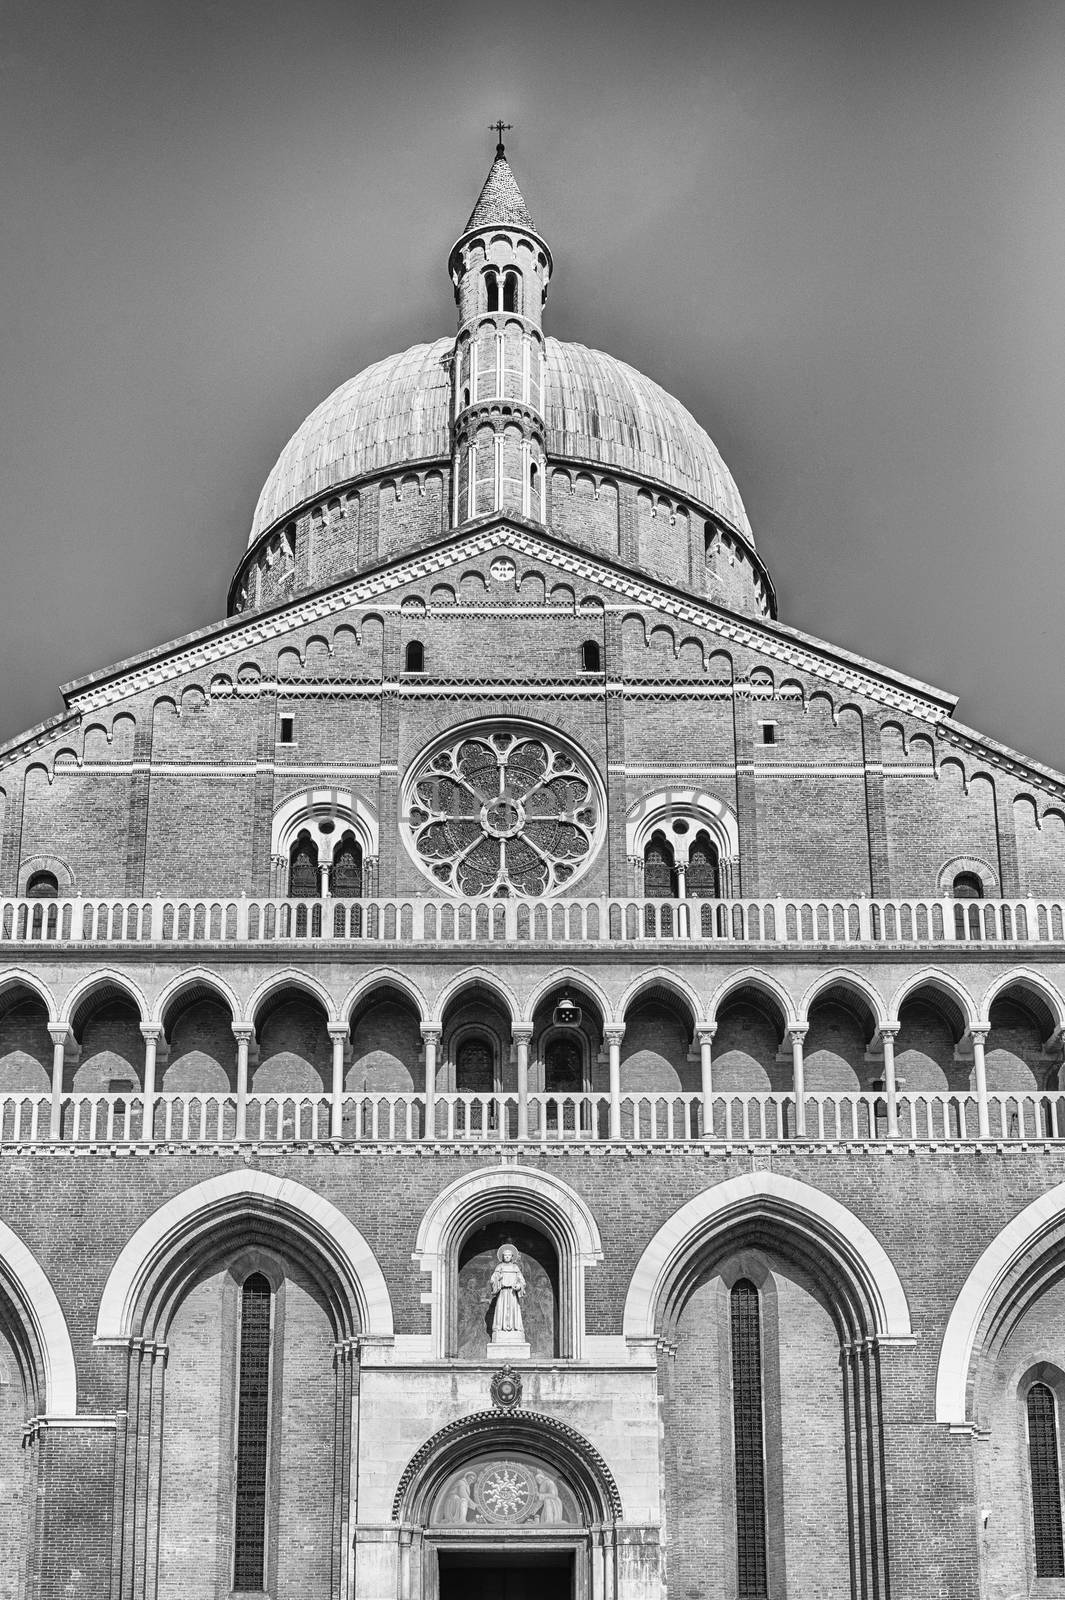 Facade of the Basilica of Saint Anthony, iconic landmark and sightseeing in Padua, Italy